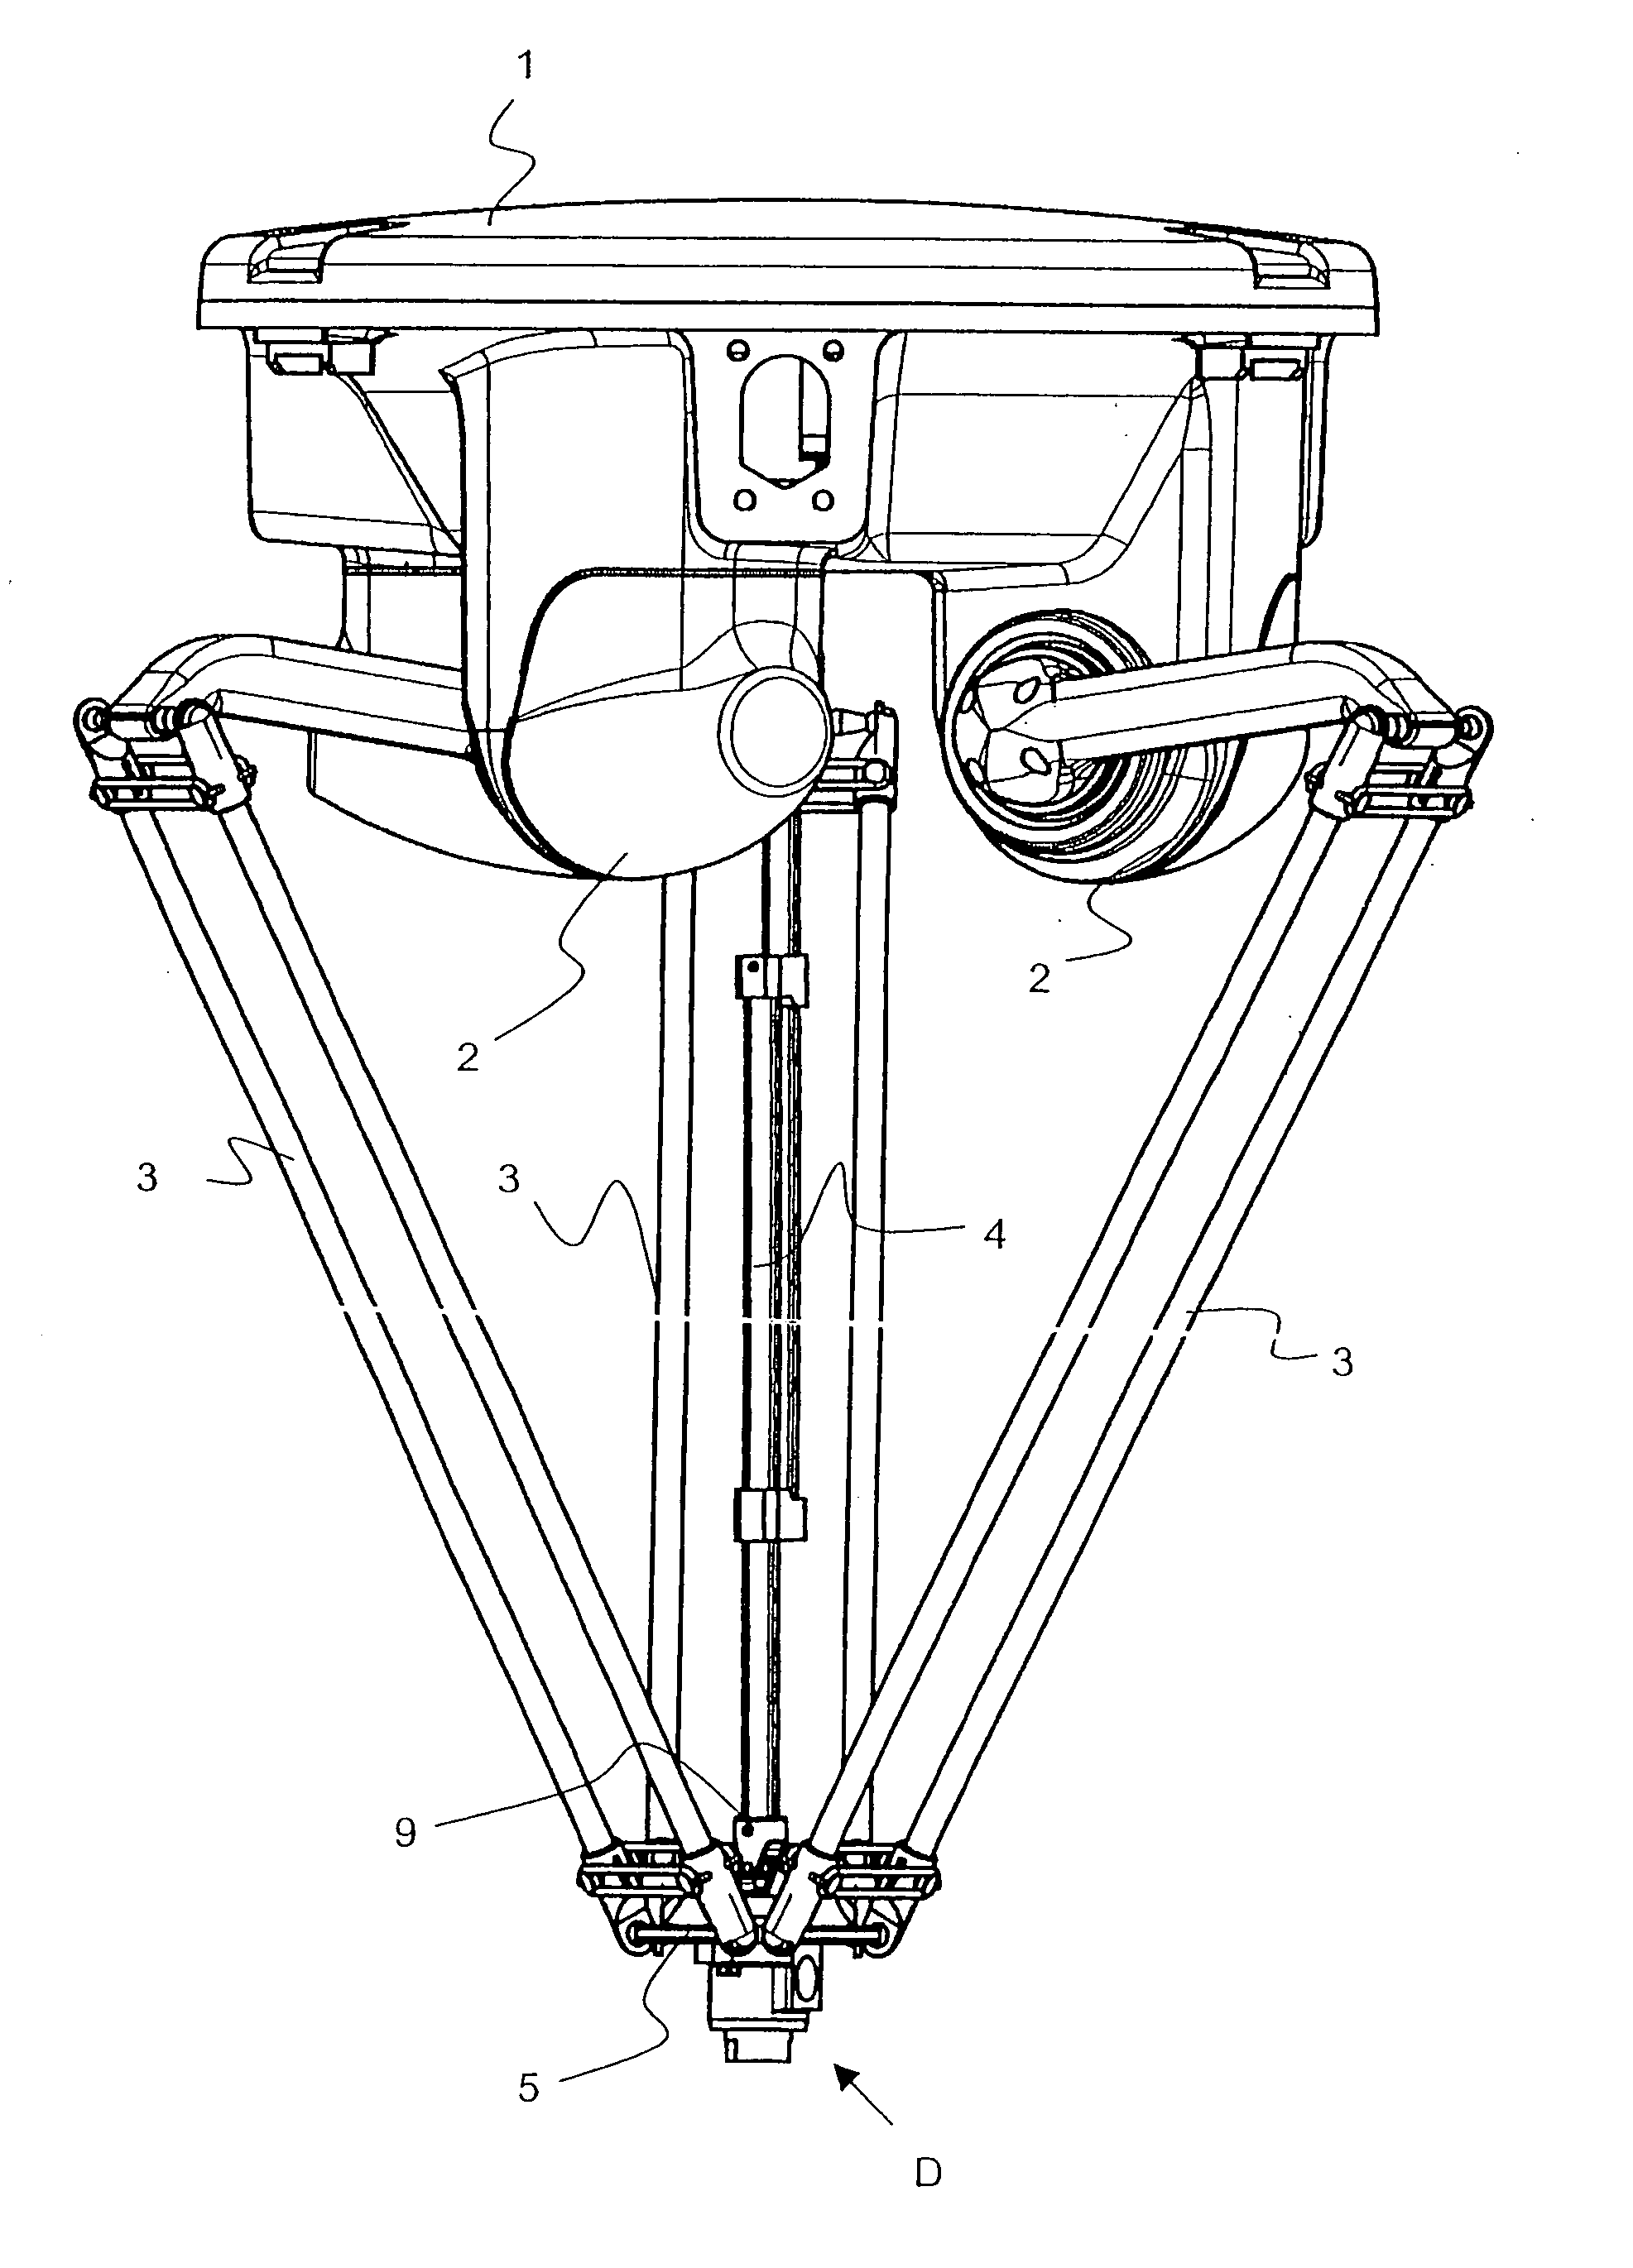 Rotary leadthrough of a robot arm